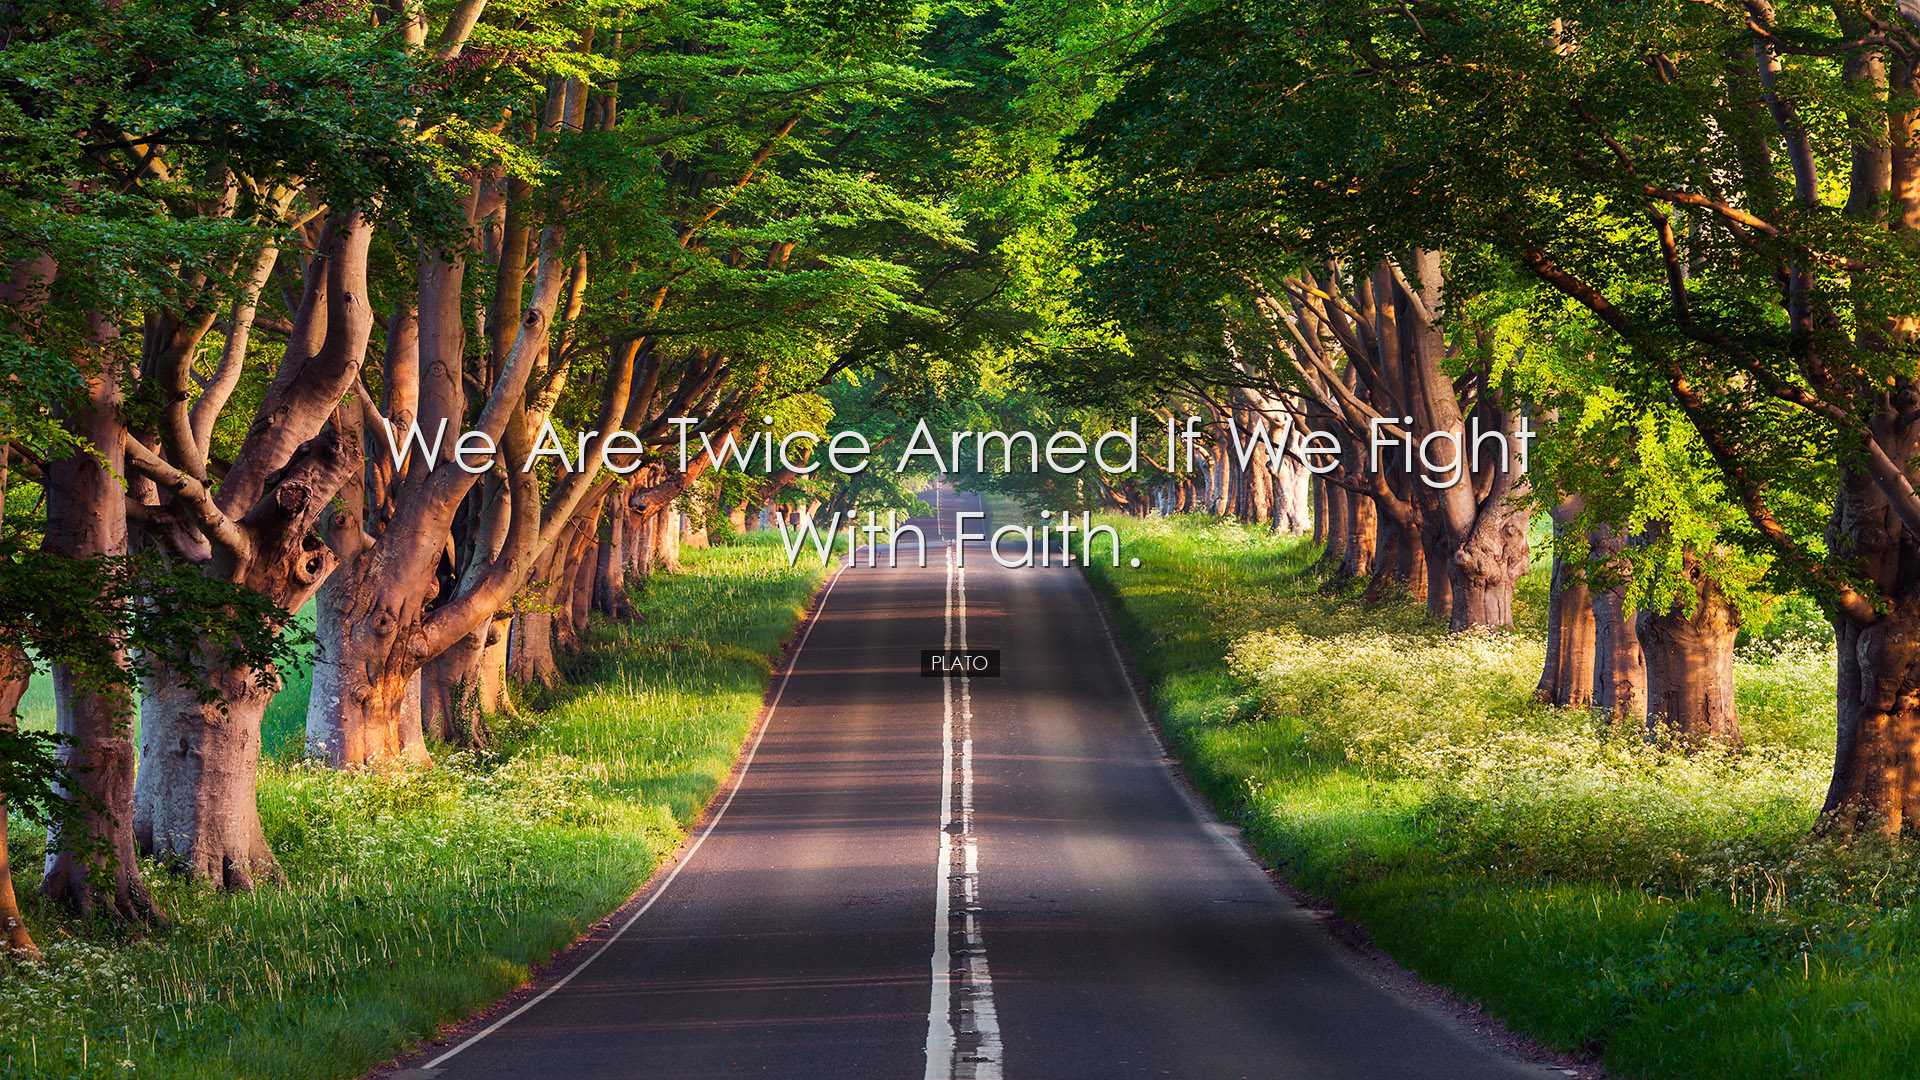 We are twice armed if we fight with faith. - Plato